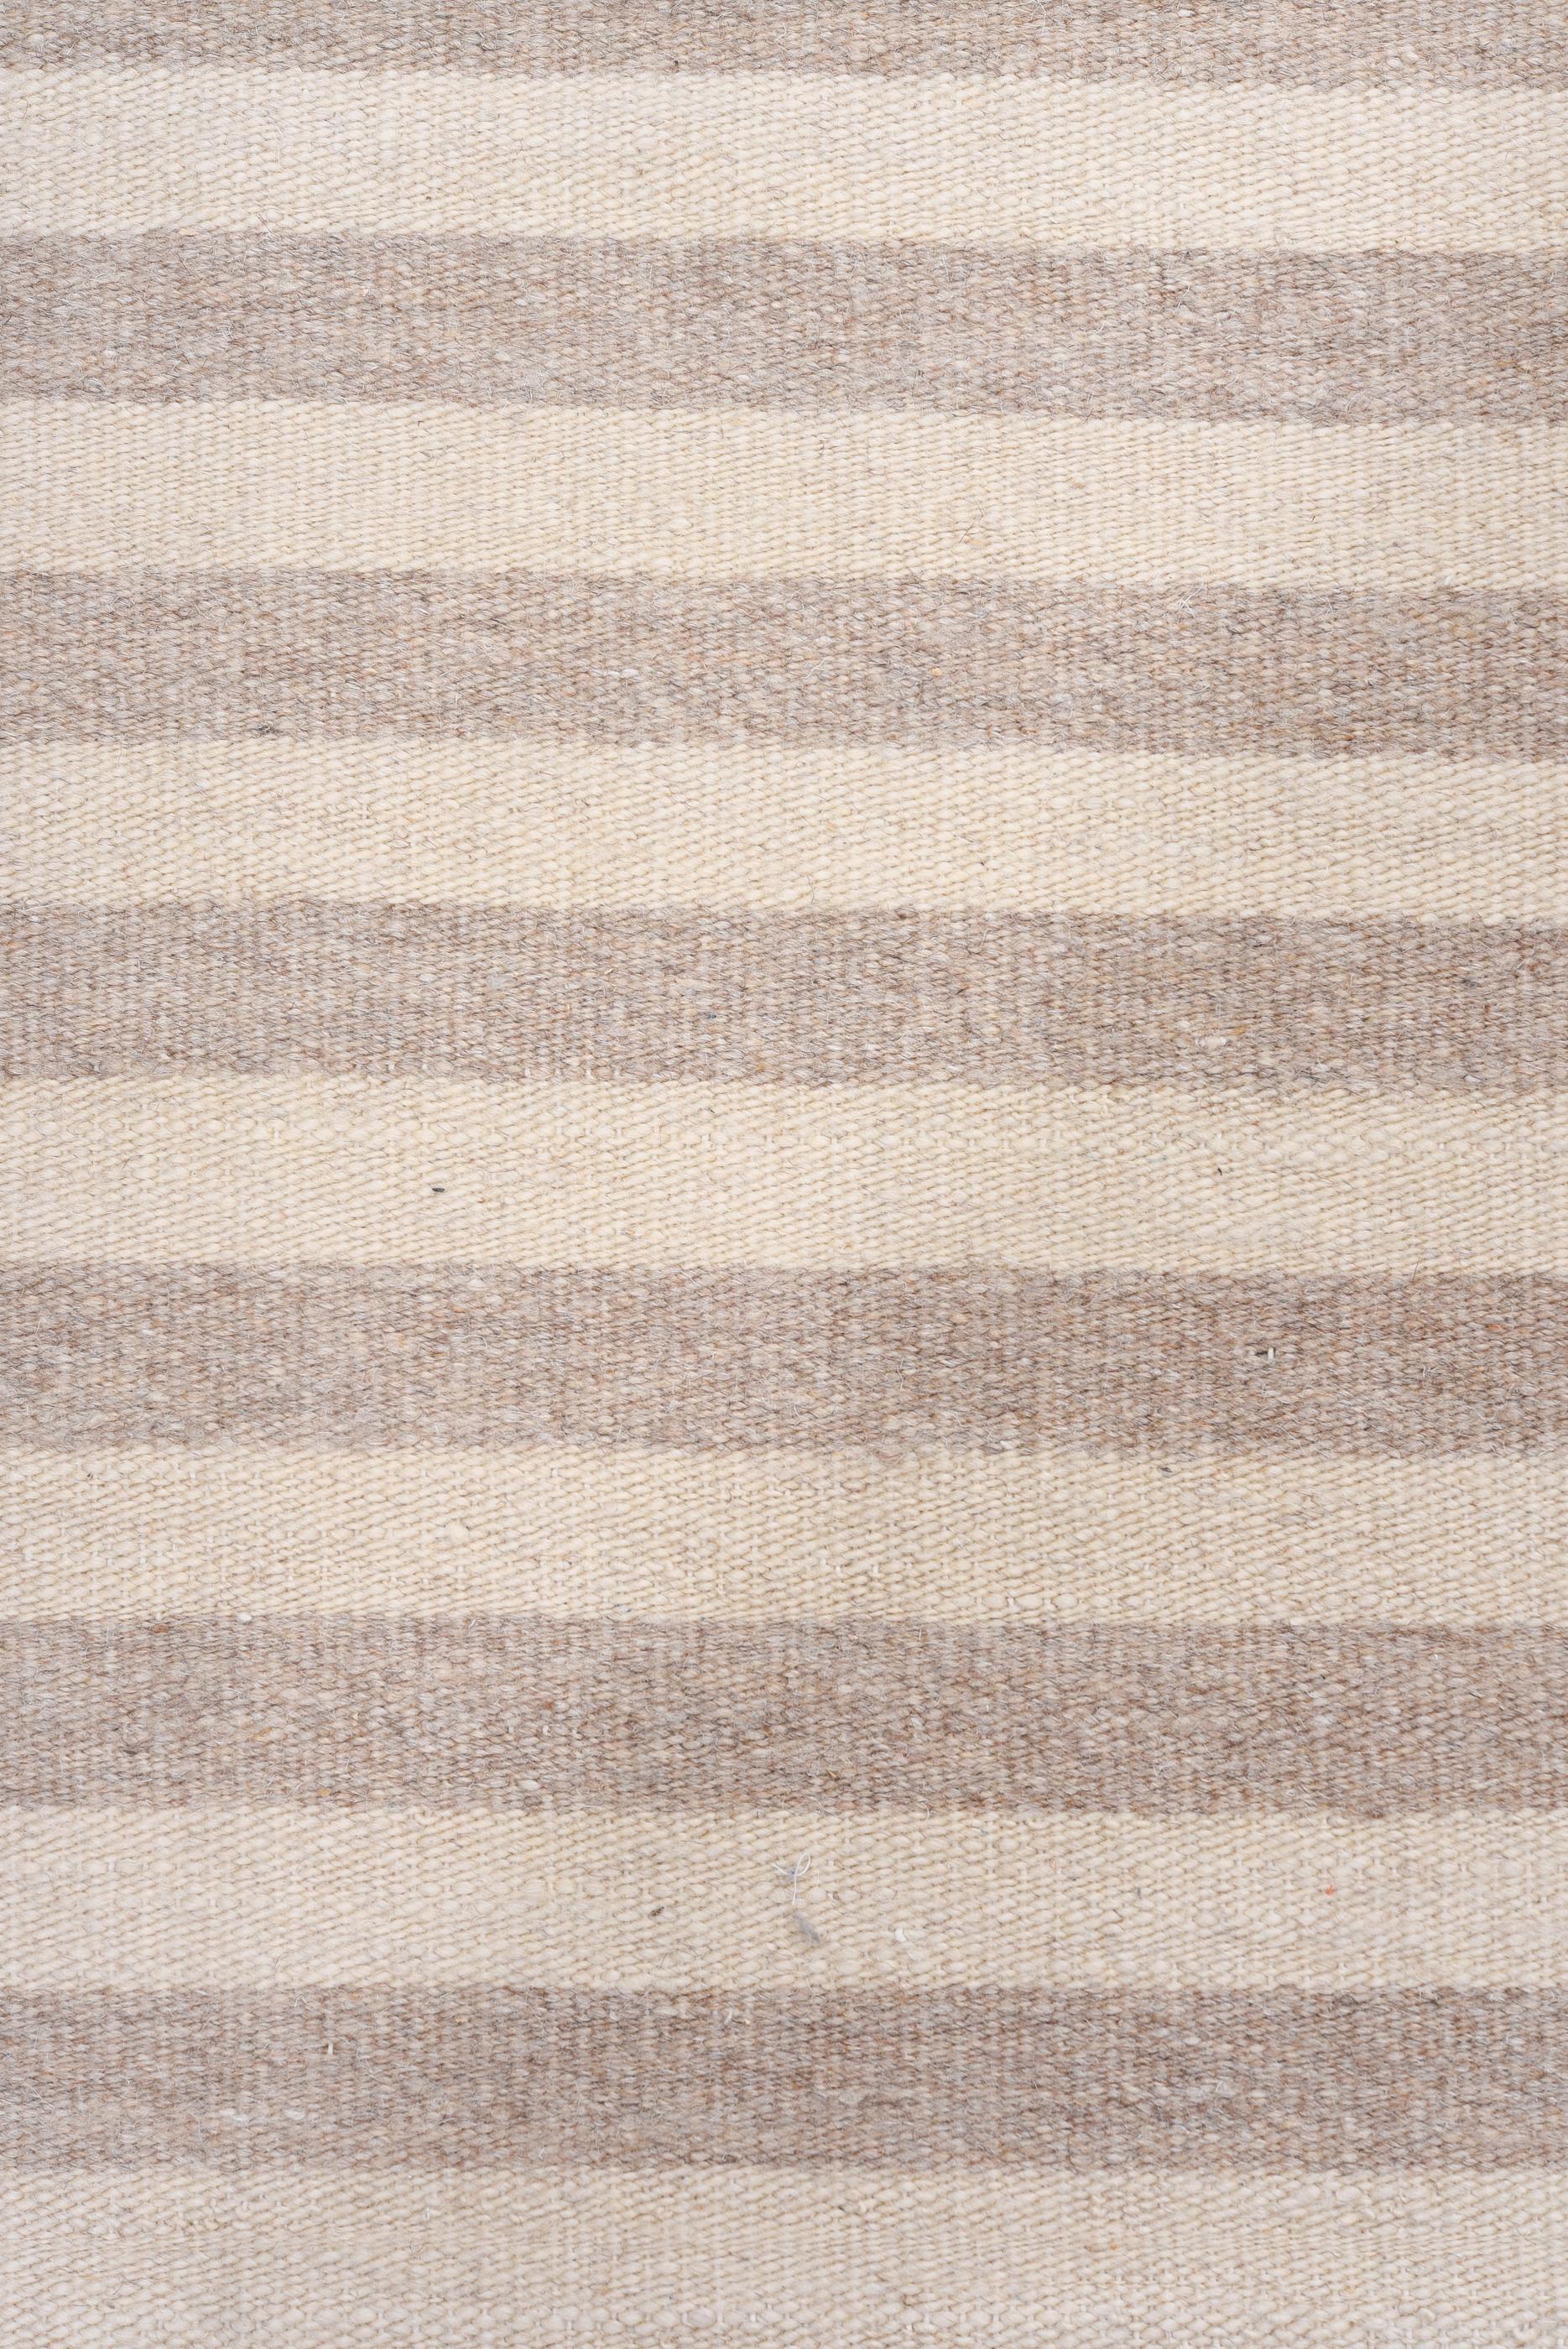 Tight Striped Linen Look Kilim In Good Condition For Sale In New York, NY